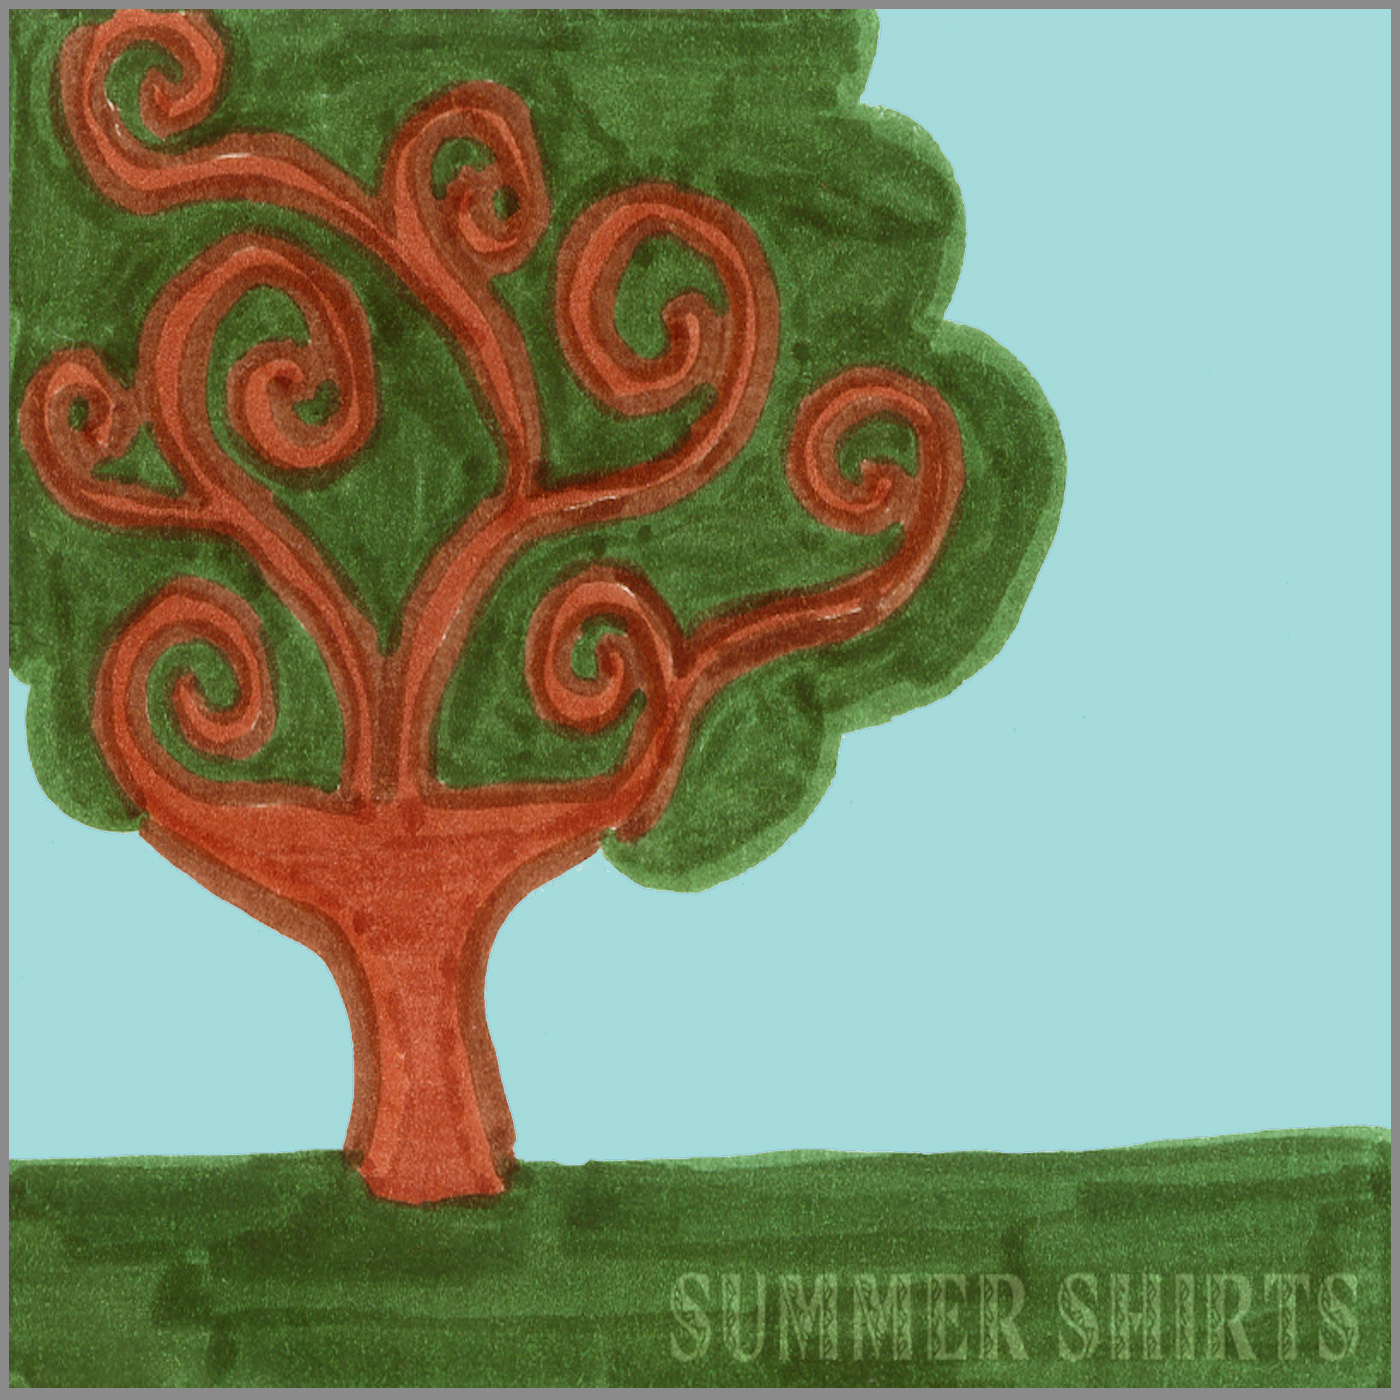 Summer Shirts  is a side project of former Montreal Quebec band Shooting Rubys founding members Patrick Dub and Patrick Gervais